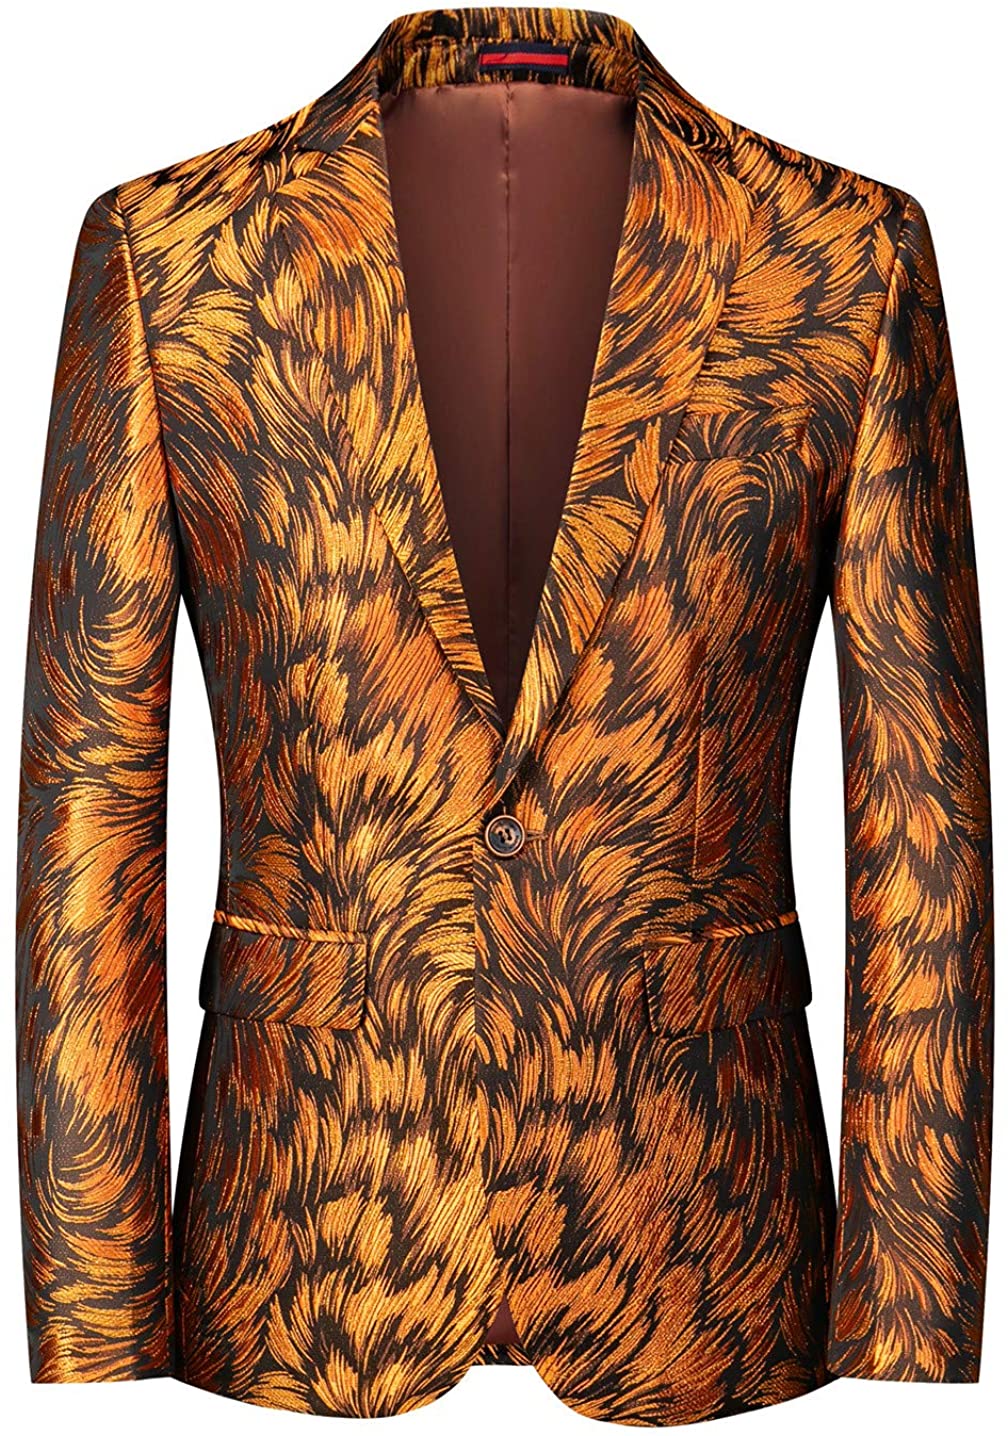 Italian Style Men's Single Breasted Golden Brown Leaf Printed Fully Lined Blazer